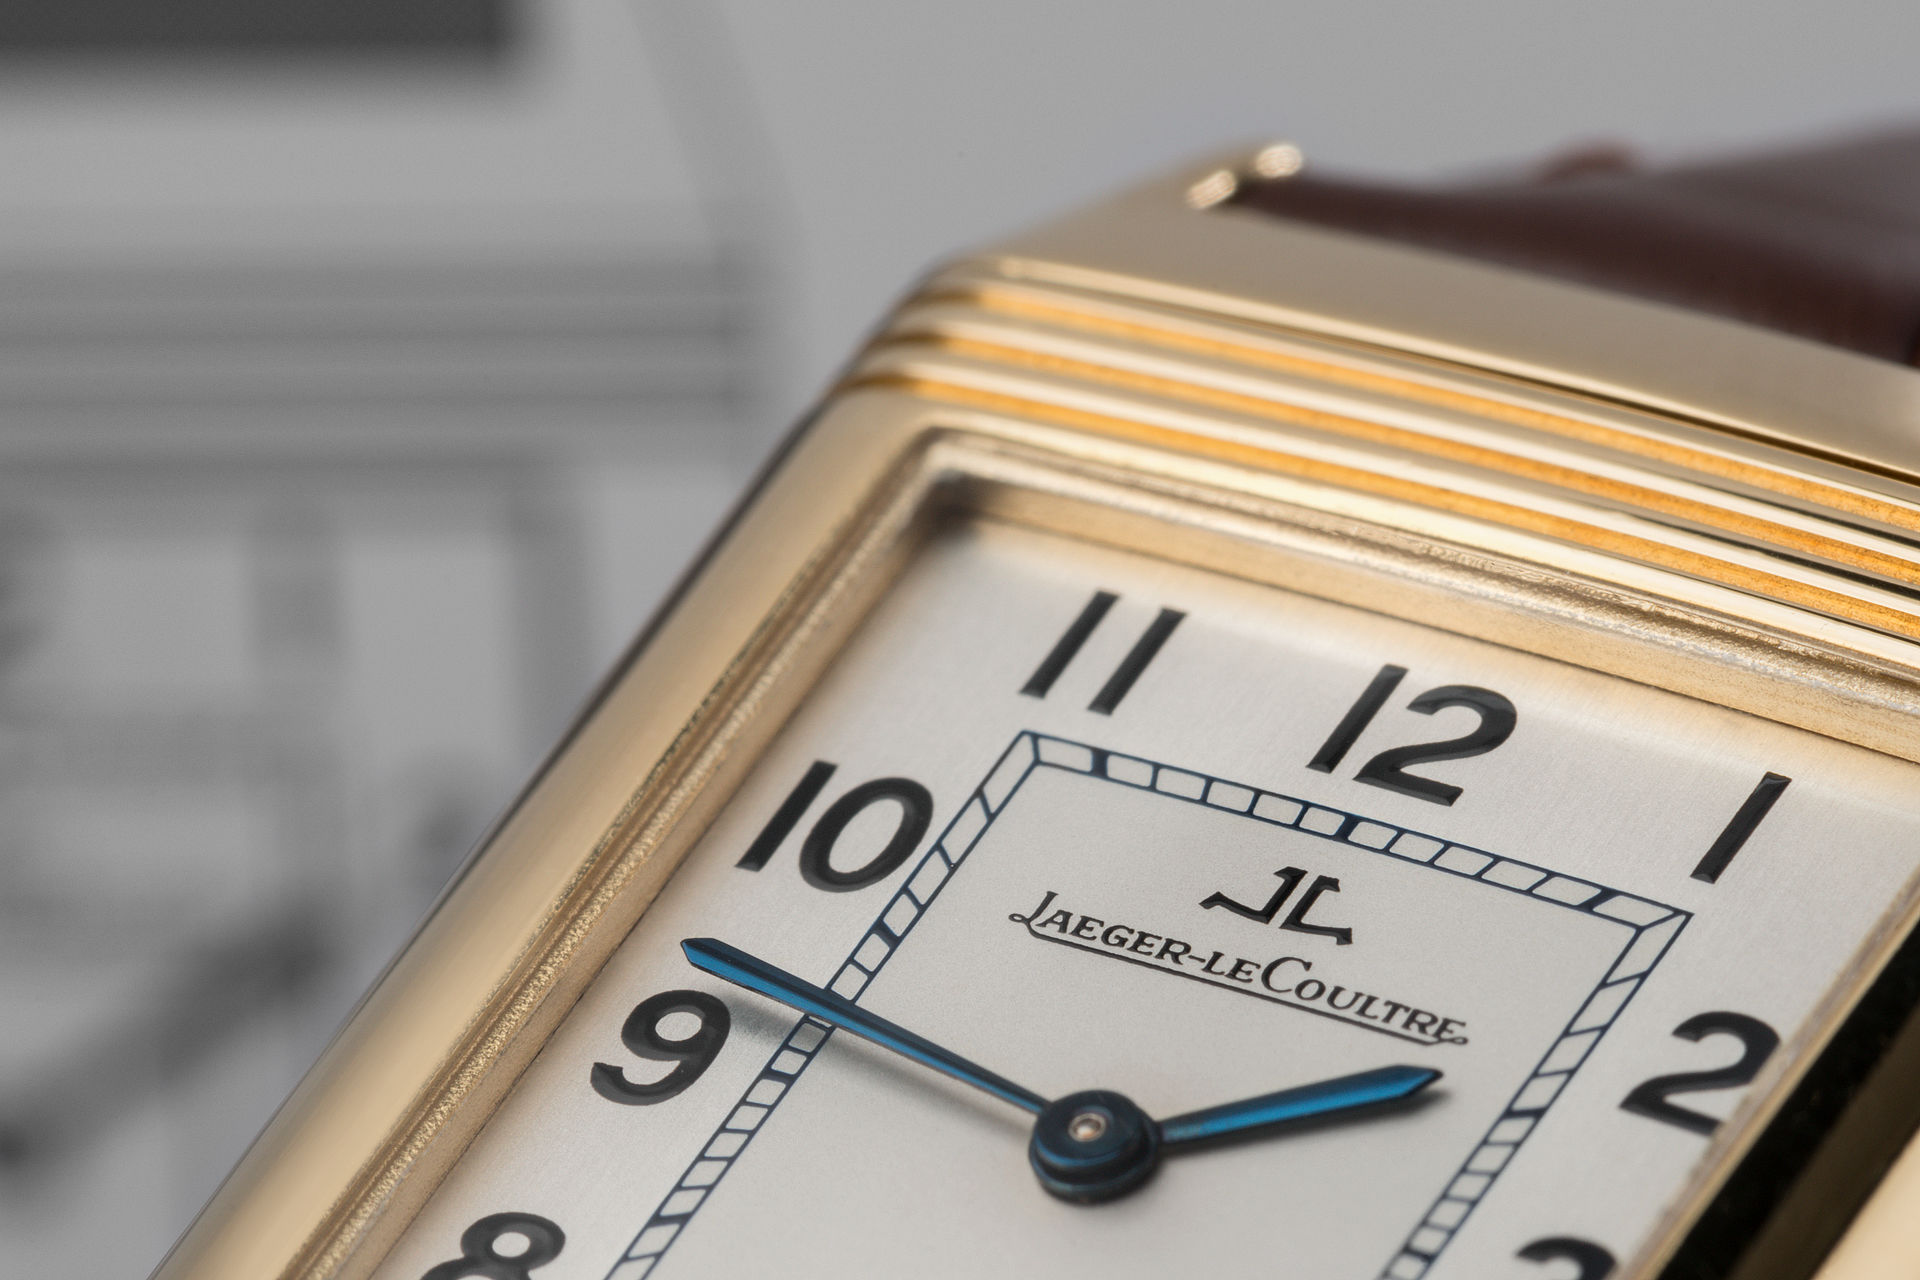 ref 250.140.862B | Yellow Gold 'Box & Papers' | Jaeger-leCoultre Reverso